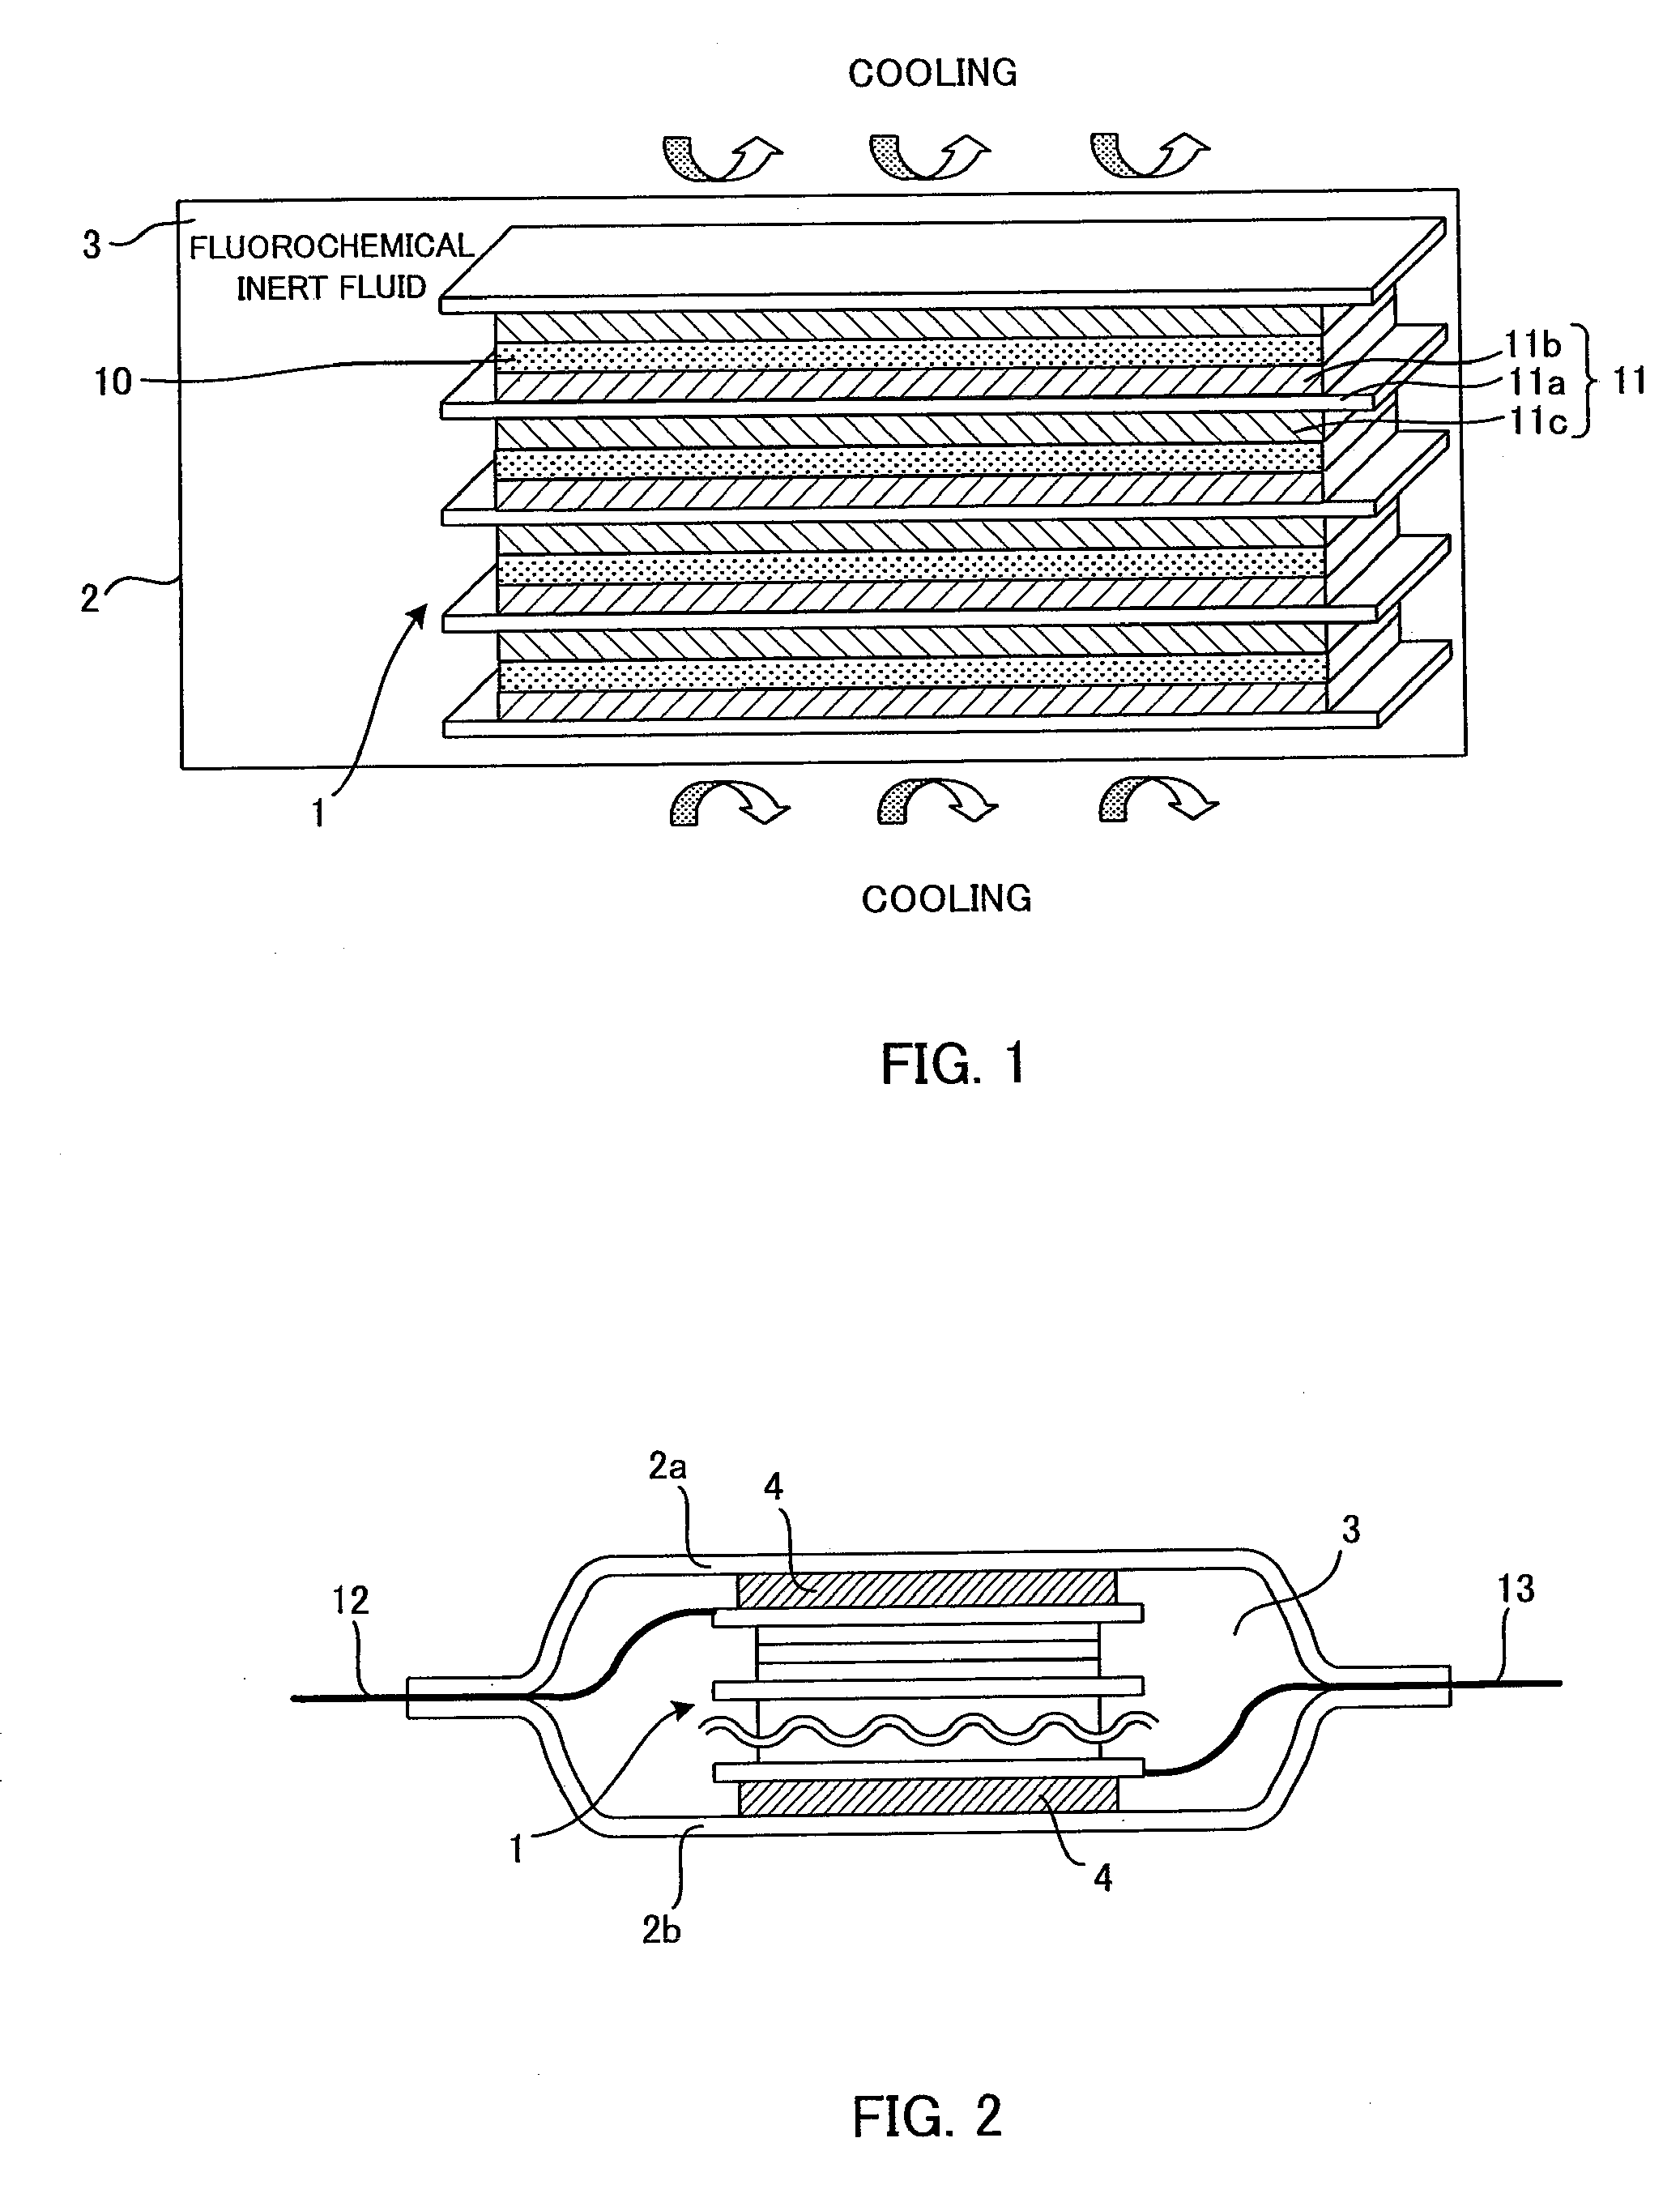 Power storage apparatus and cooling system